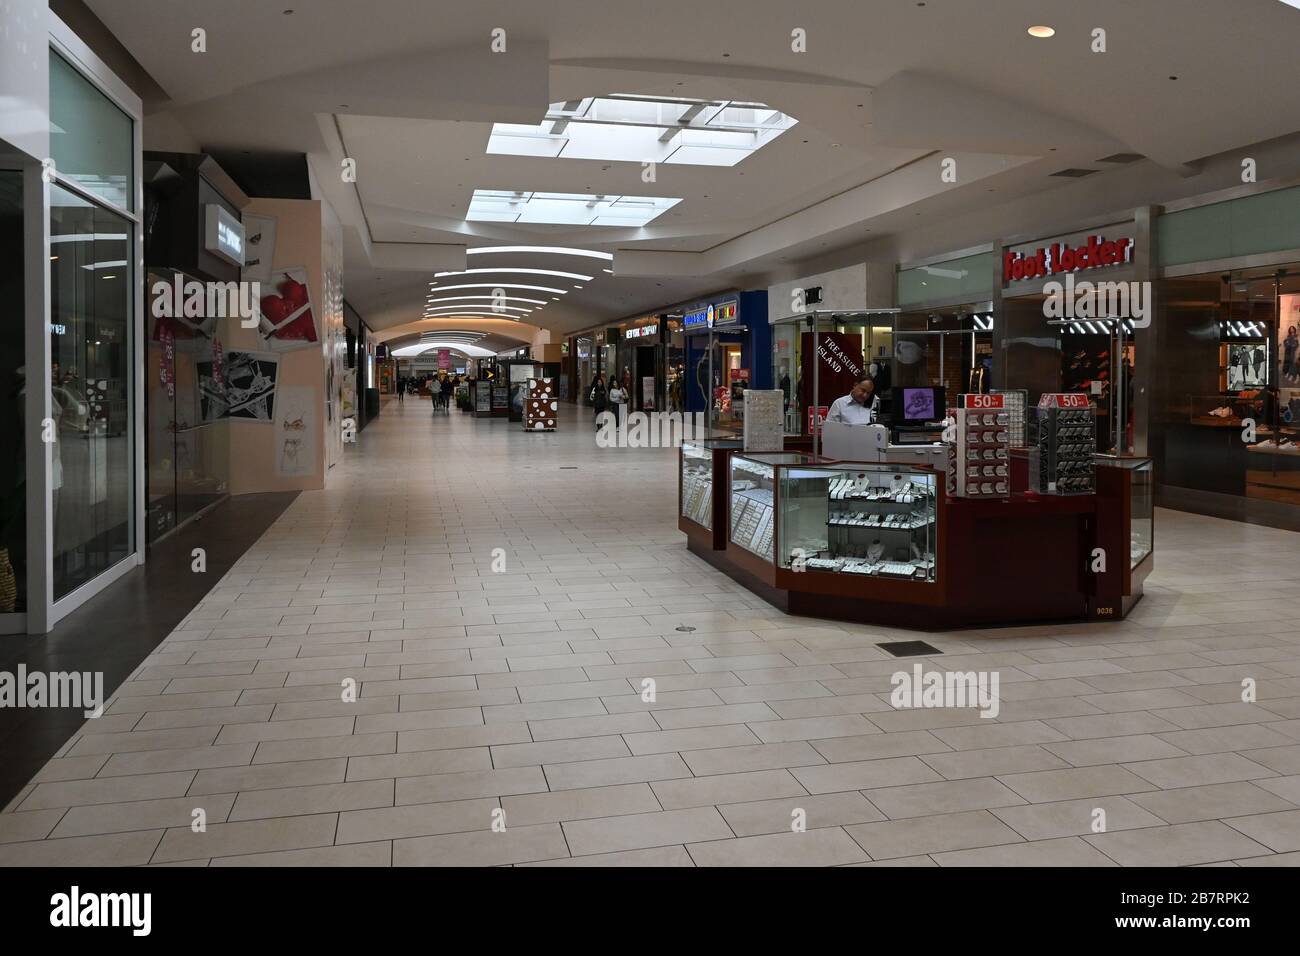 General overall view of the deserted Los Cerritos Center mall, Tuesday, March 17, 2020, in Cerritos, Calif. The shopping center has reduced hours and stores have closed because of the coronavirus COVID-19 pandemic outbreak. (Photo by IOS/Espa-Images) Stock Photo